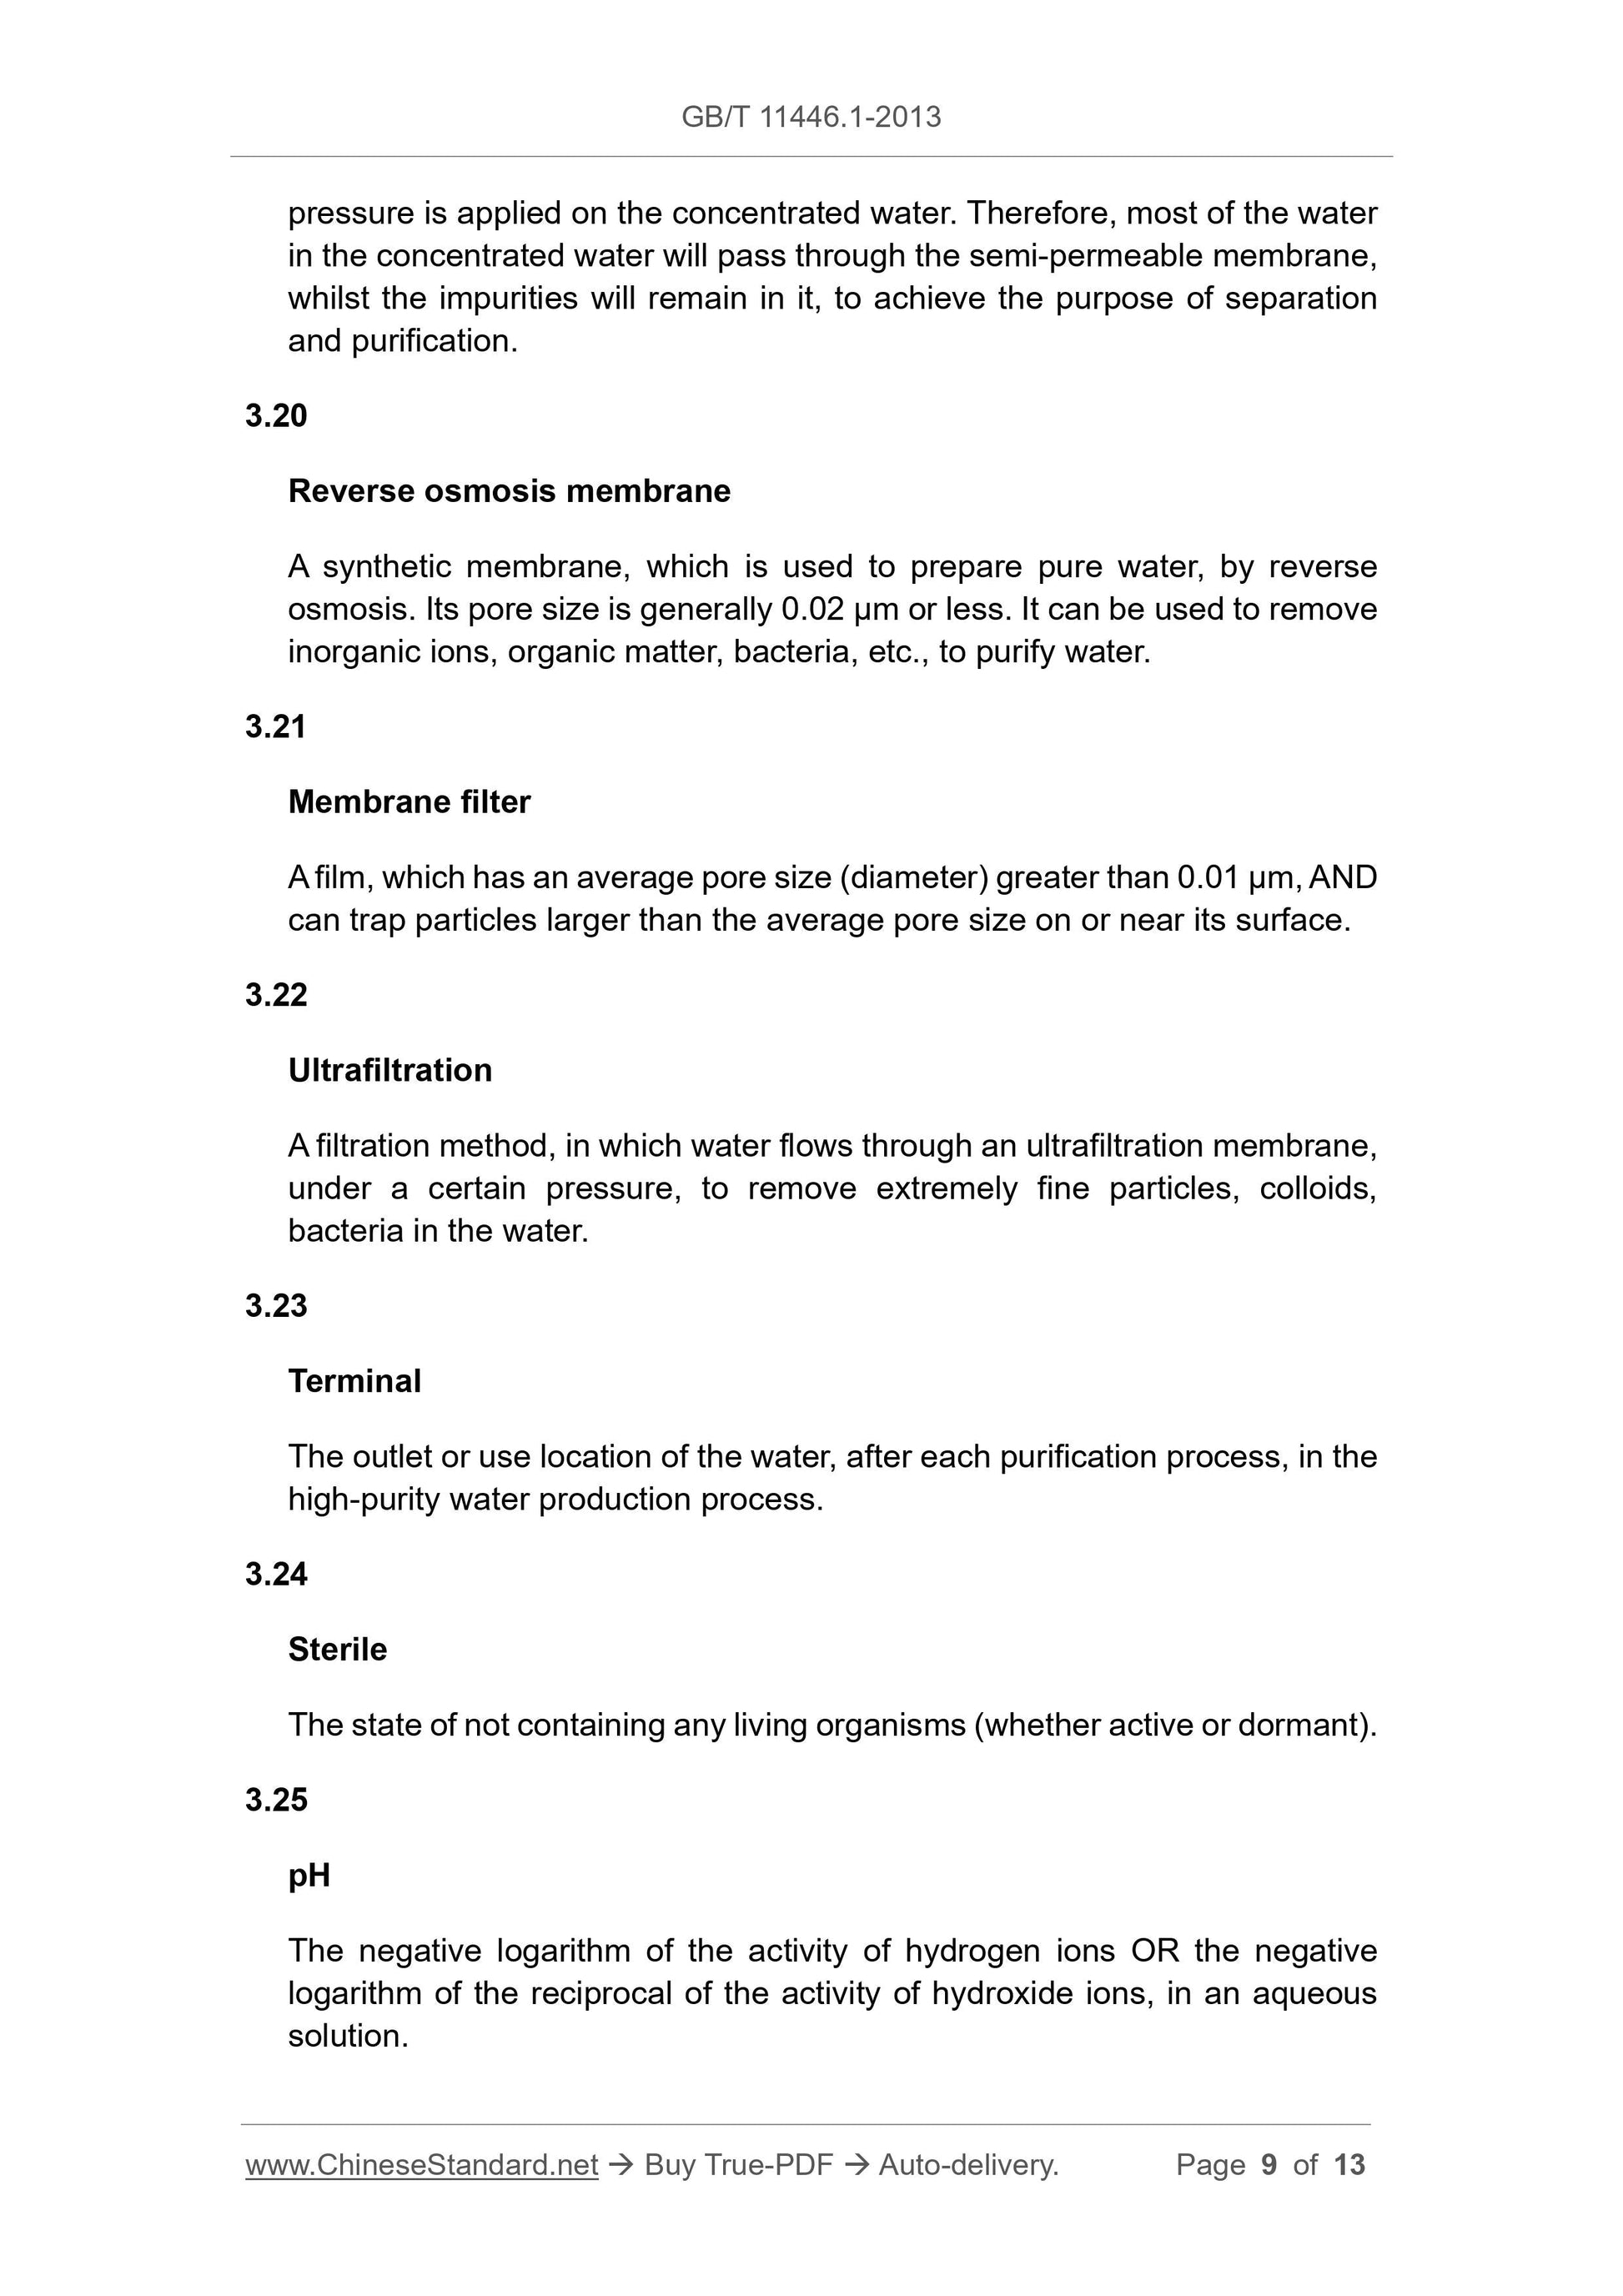 GB/T 11446.1-2013 Page 5